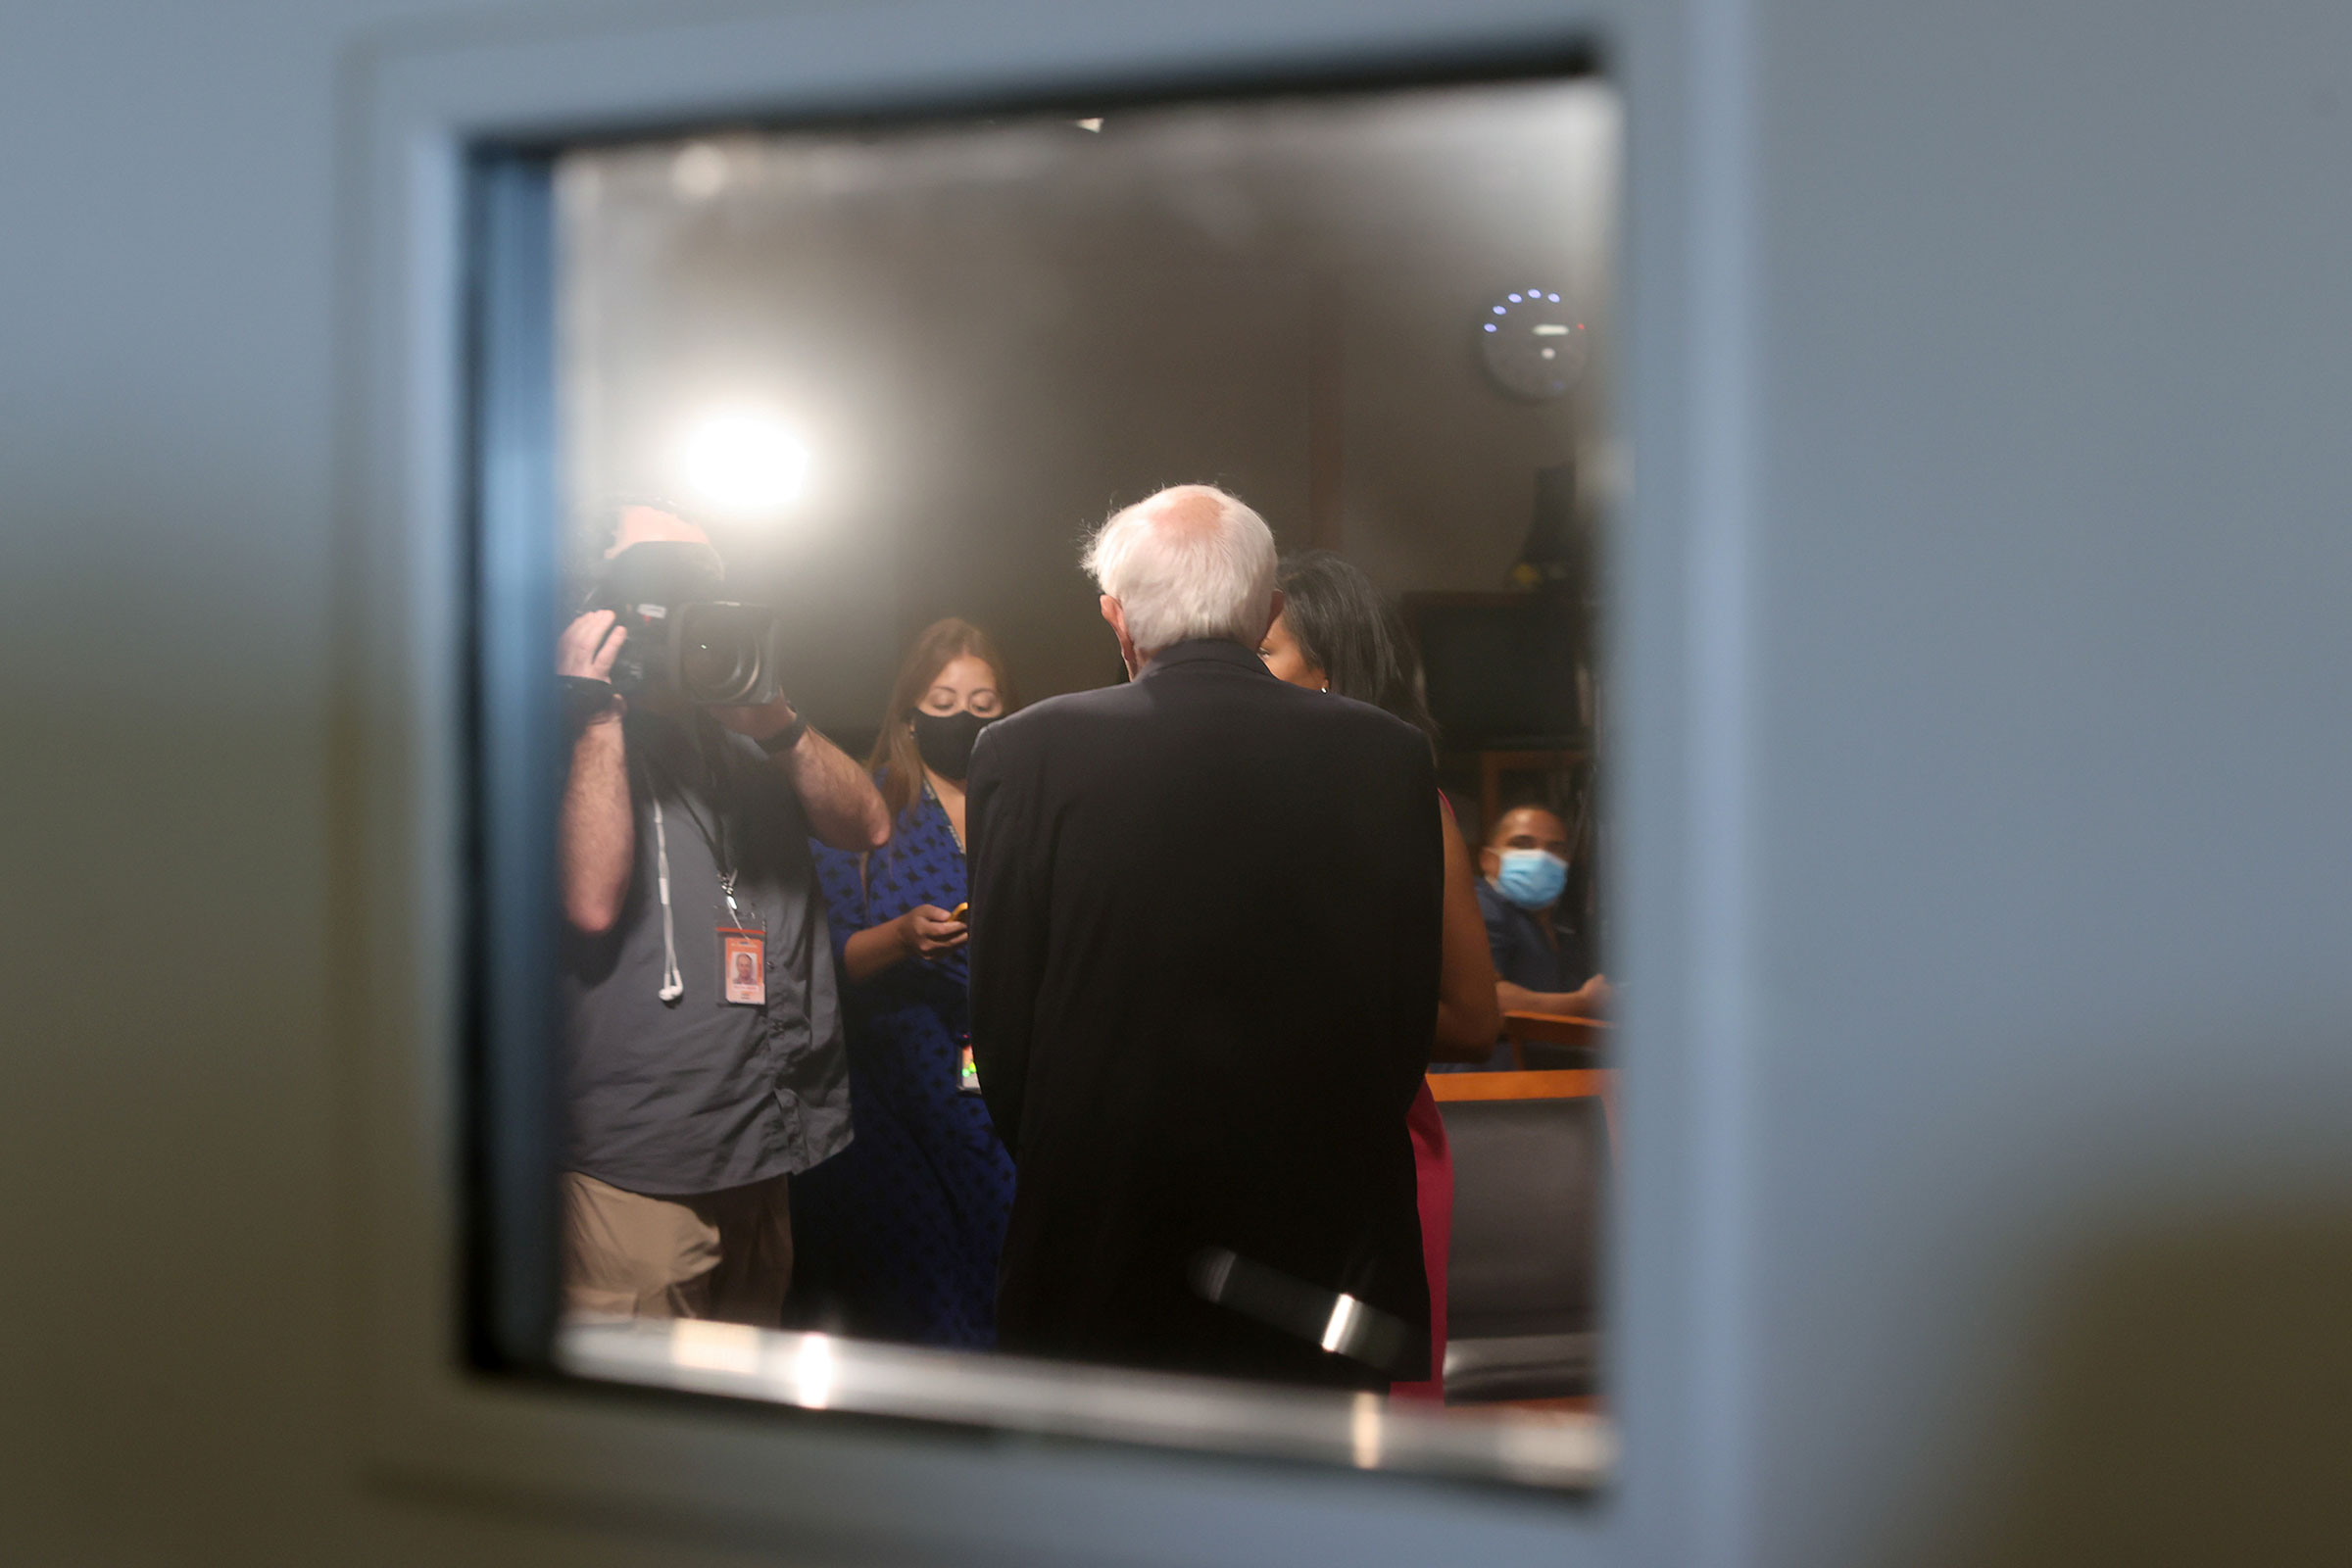 Sanders takes time for a television interview between votes on the Senate floor prior to passage of a $1 trillion bipartisan infrastructure bill on Aug. 10. (Jonathan Ernst—Reuters)